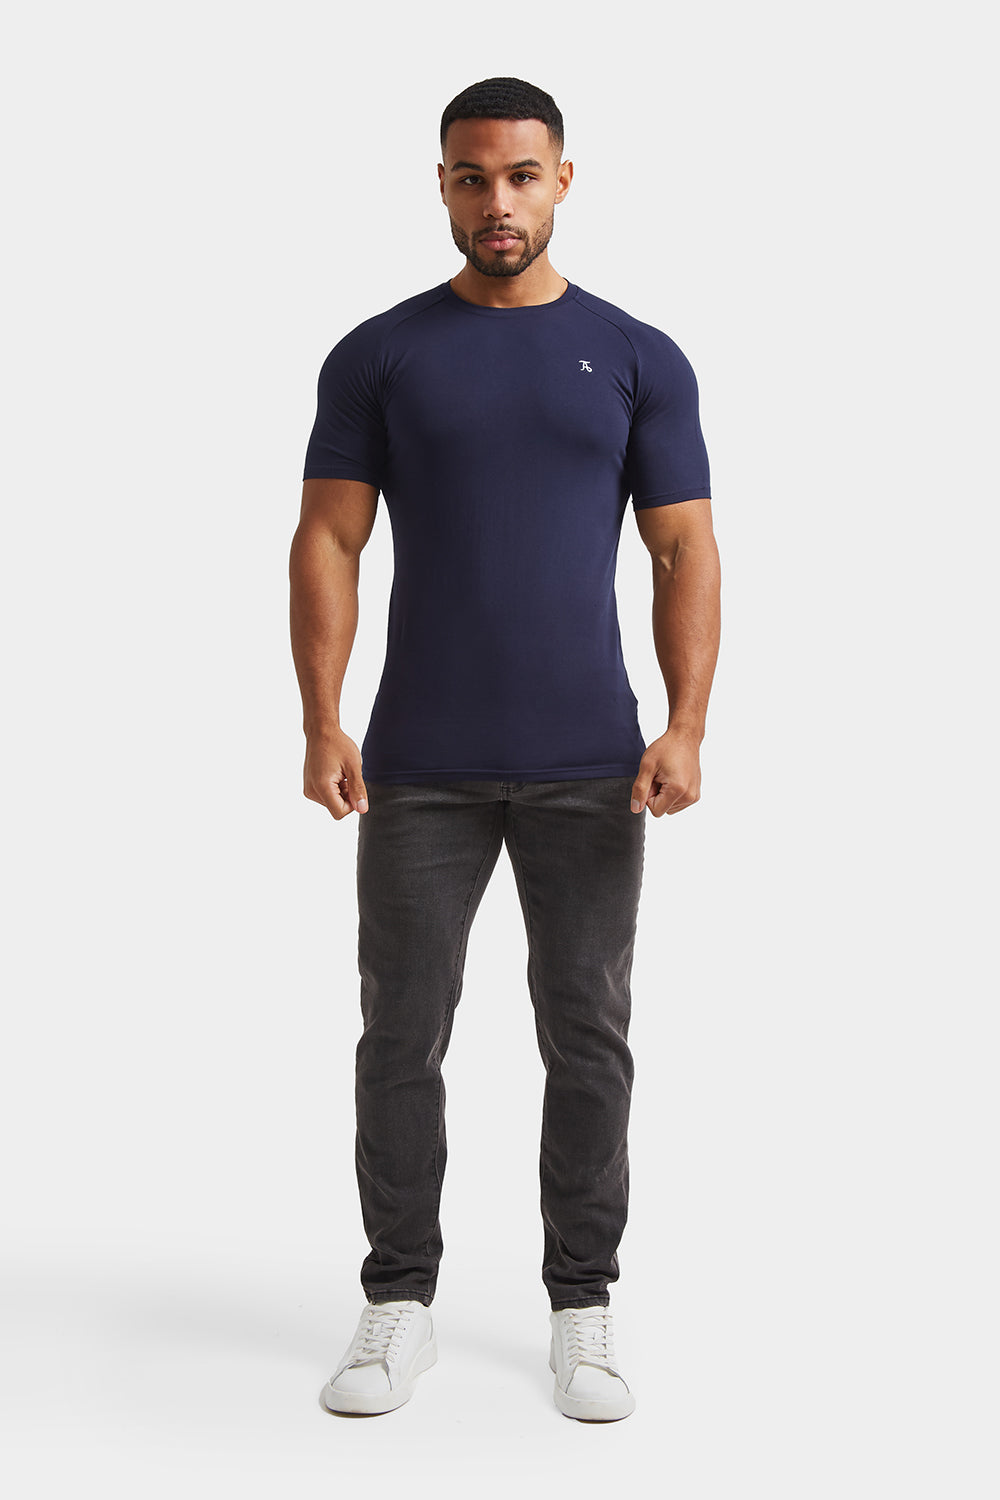 Athletic Fit T-Shirt in Soft Blue - TAILORED ATHLETE - USA